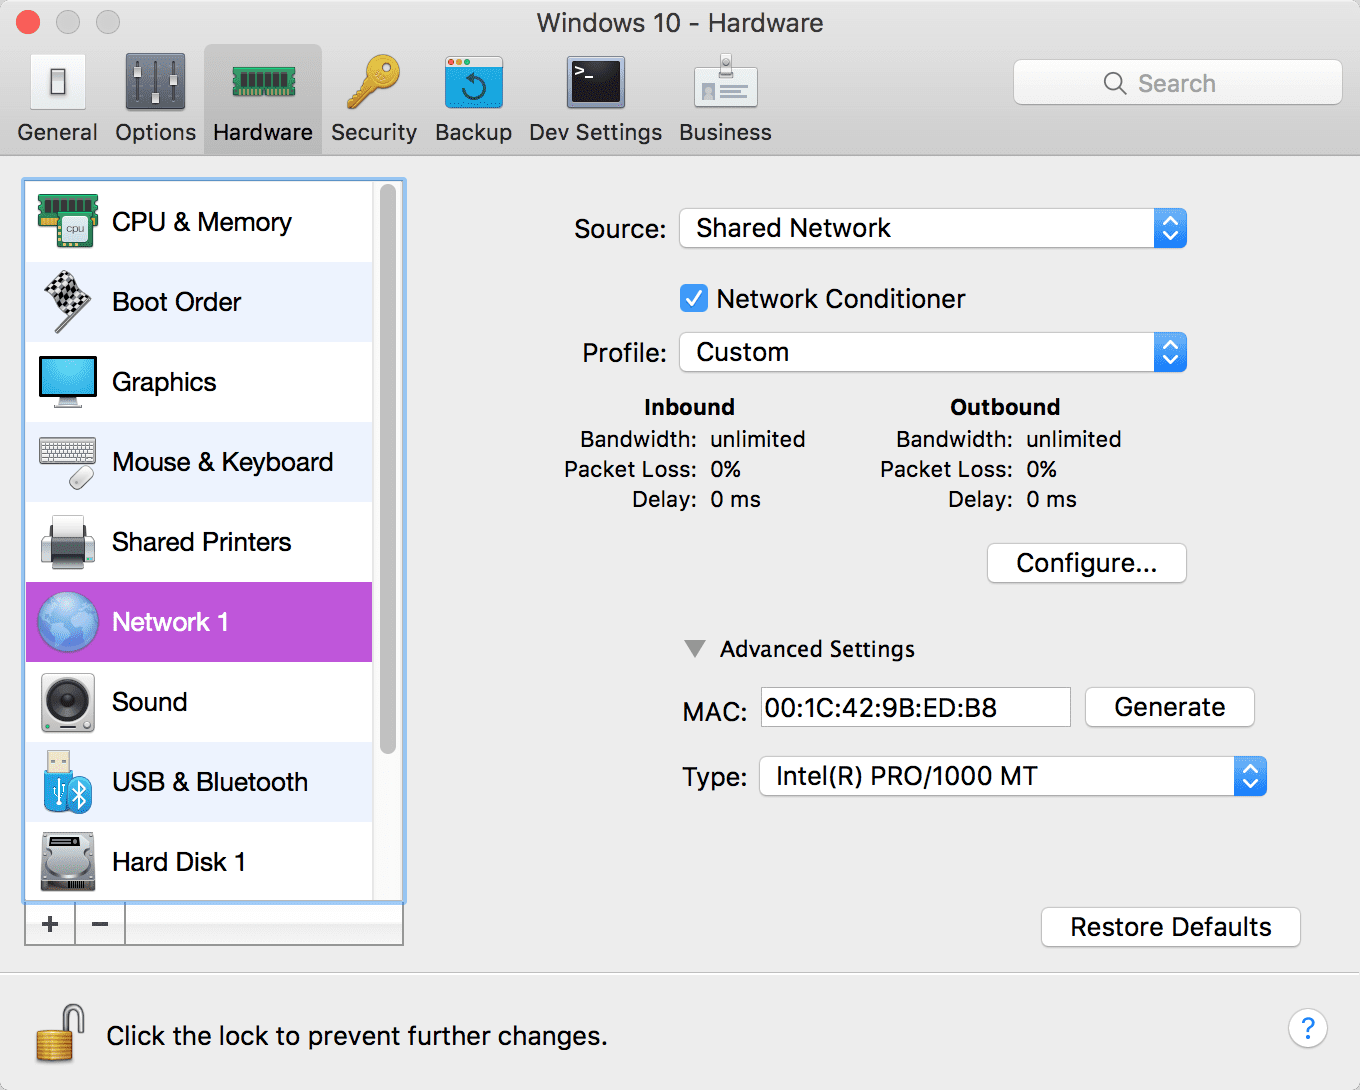 Network Conditioner - new in pro